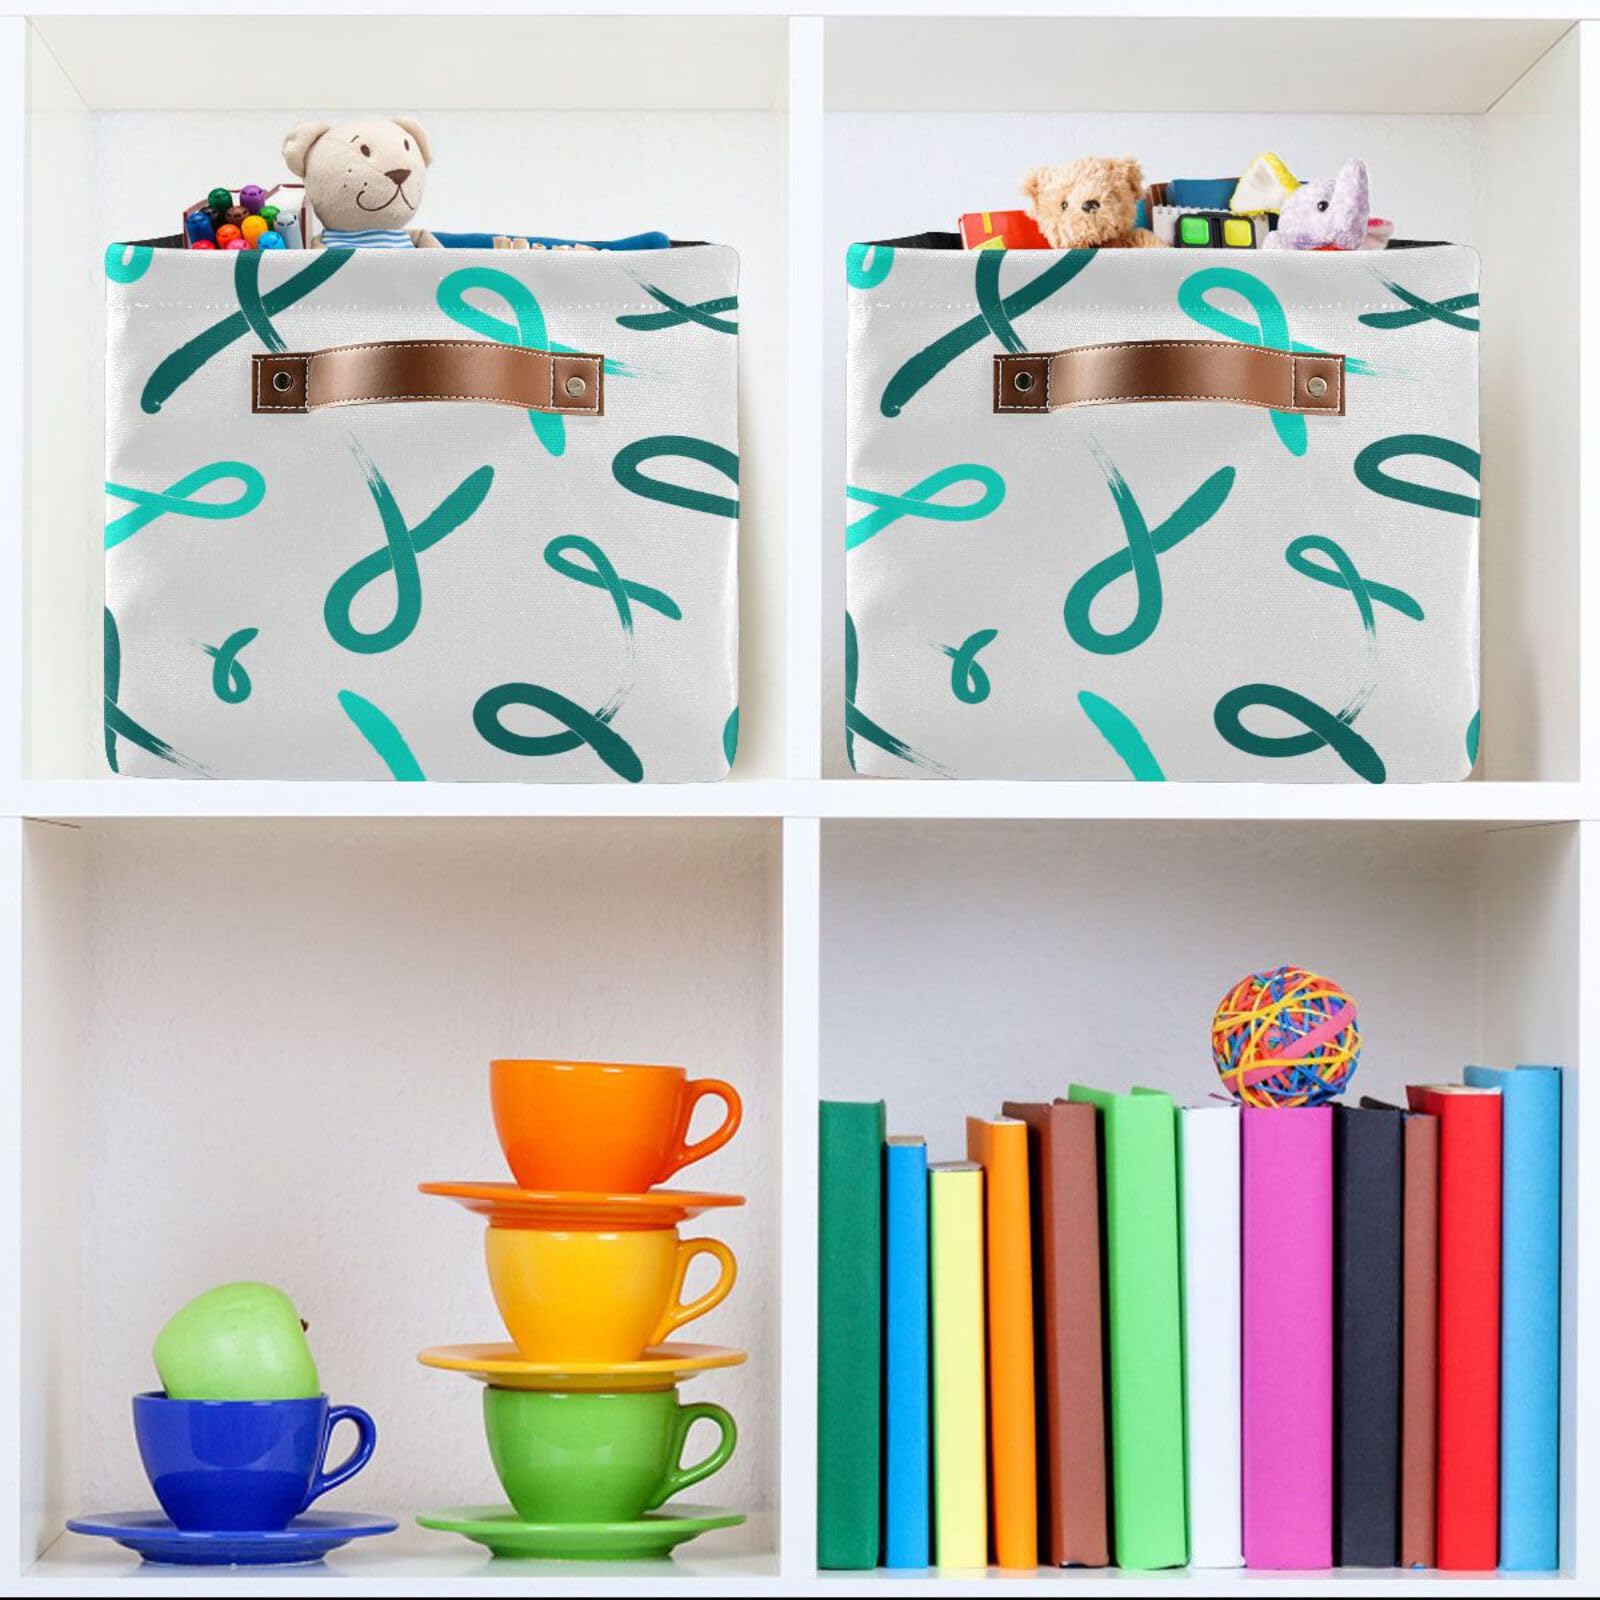 Teal Ribbon Painted Ovarian Cancer Storage Basket Foldable Large Closet Organizer Storage Containers for Office Closet Shelves, 1 Pack